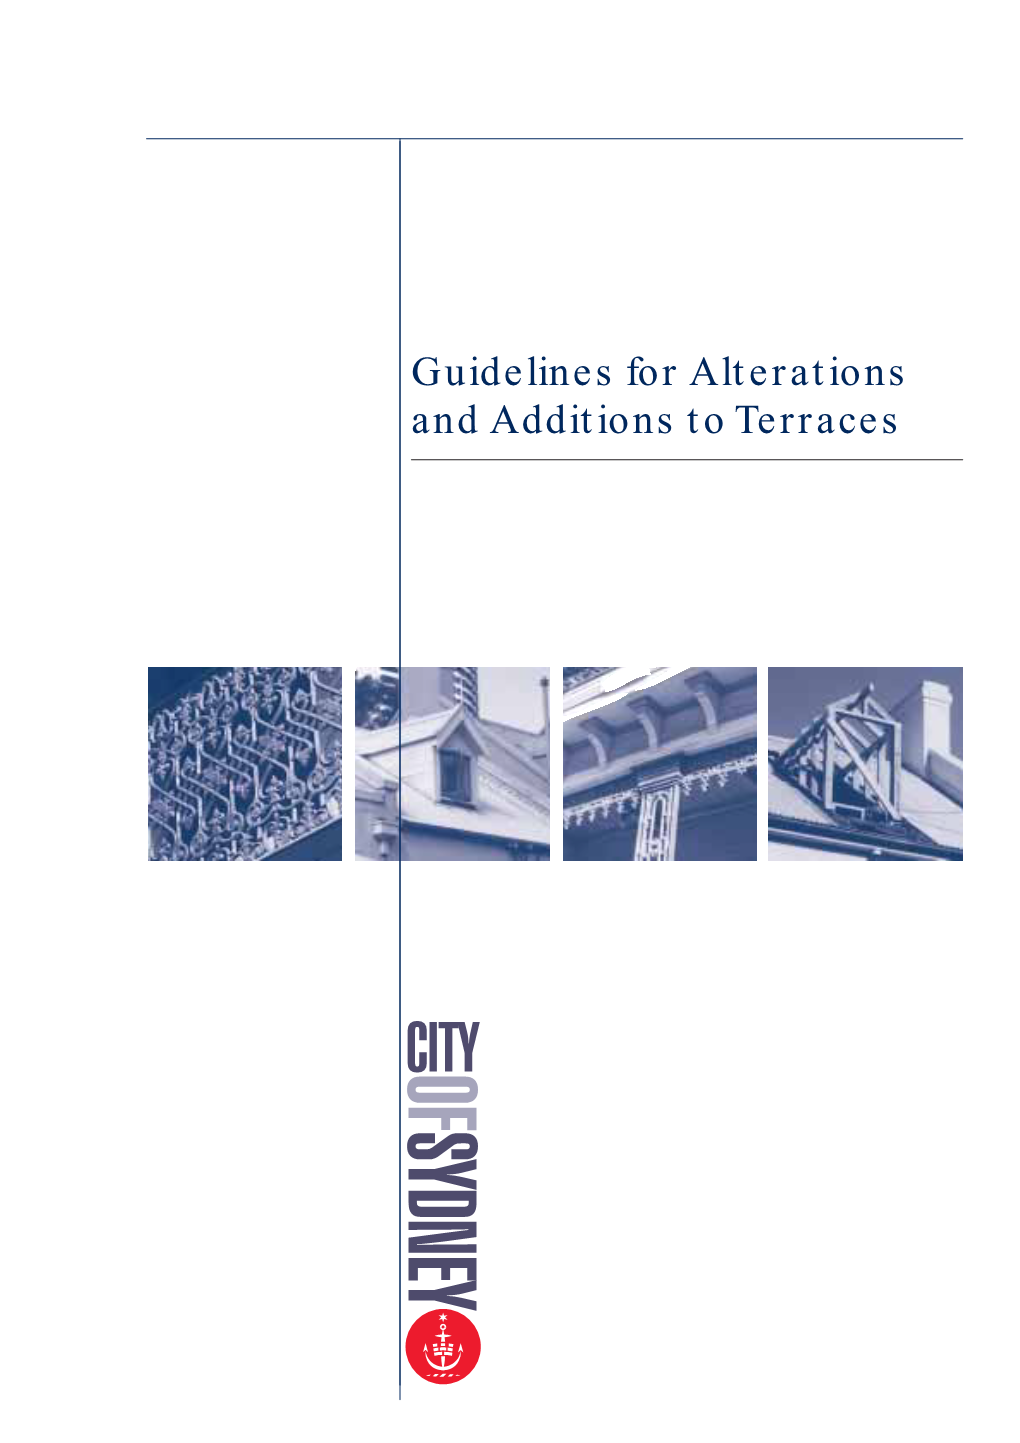 Guidelines for Alterations and Additions to Terraces Table of Contents